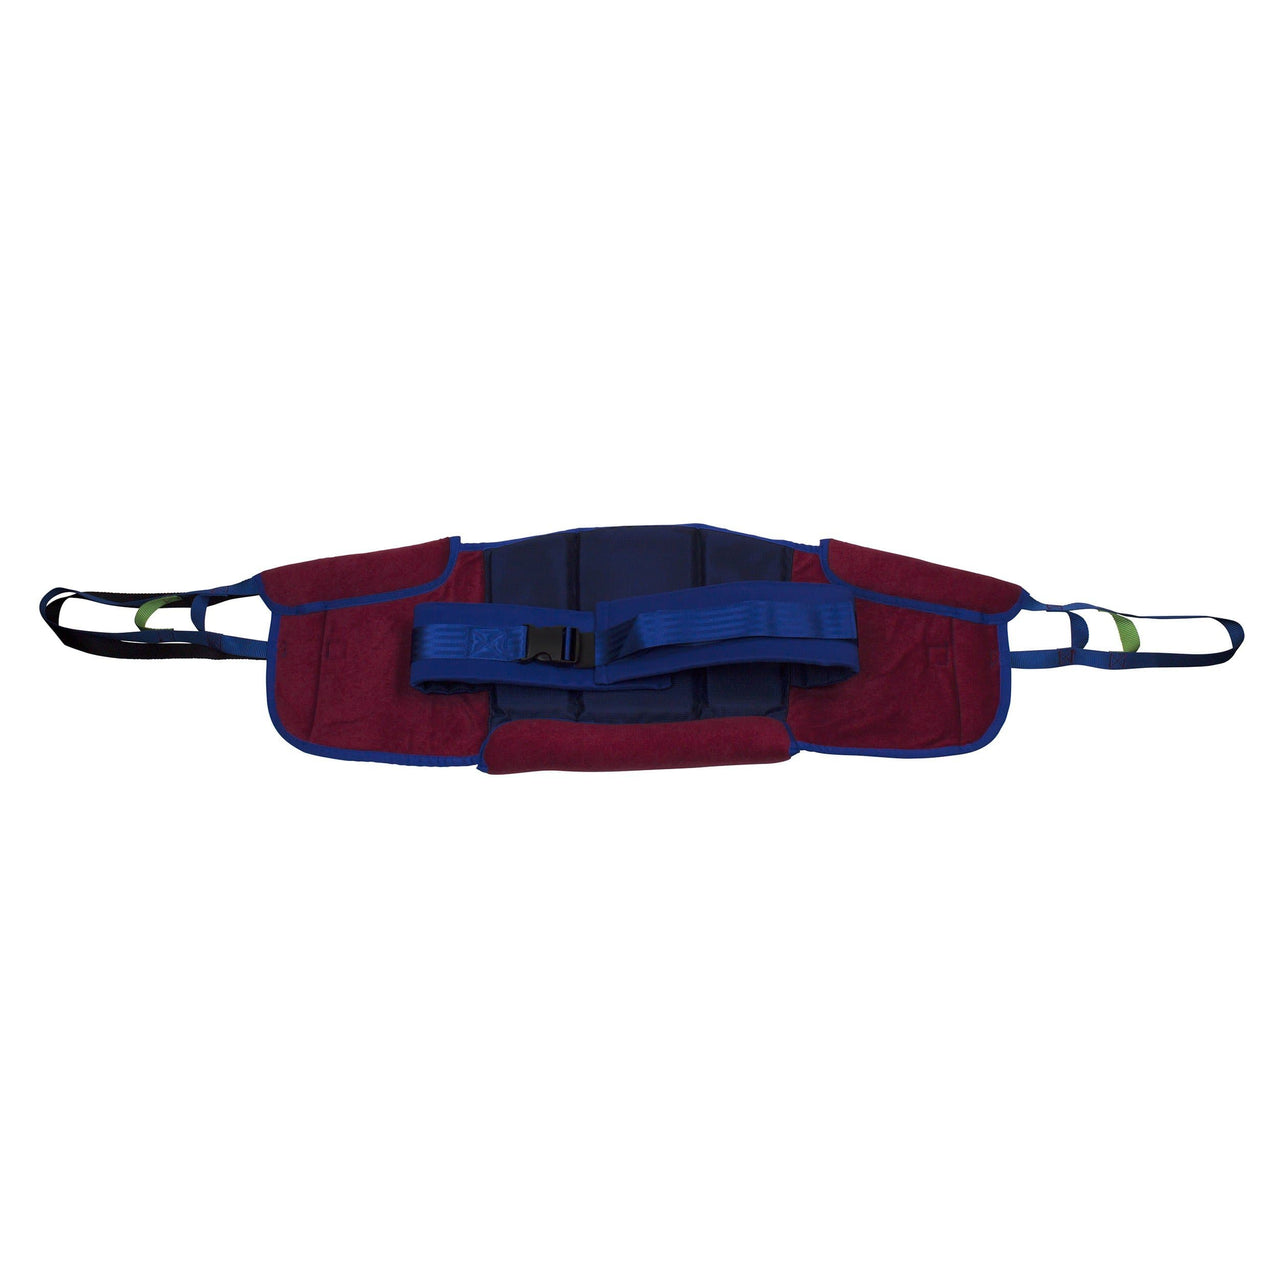 Dynarex Deluxe Sit-to-Stand Slings For Patient Lifts - Senior.com Slings